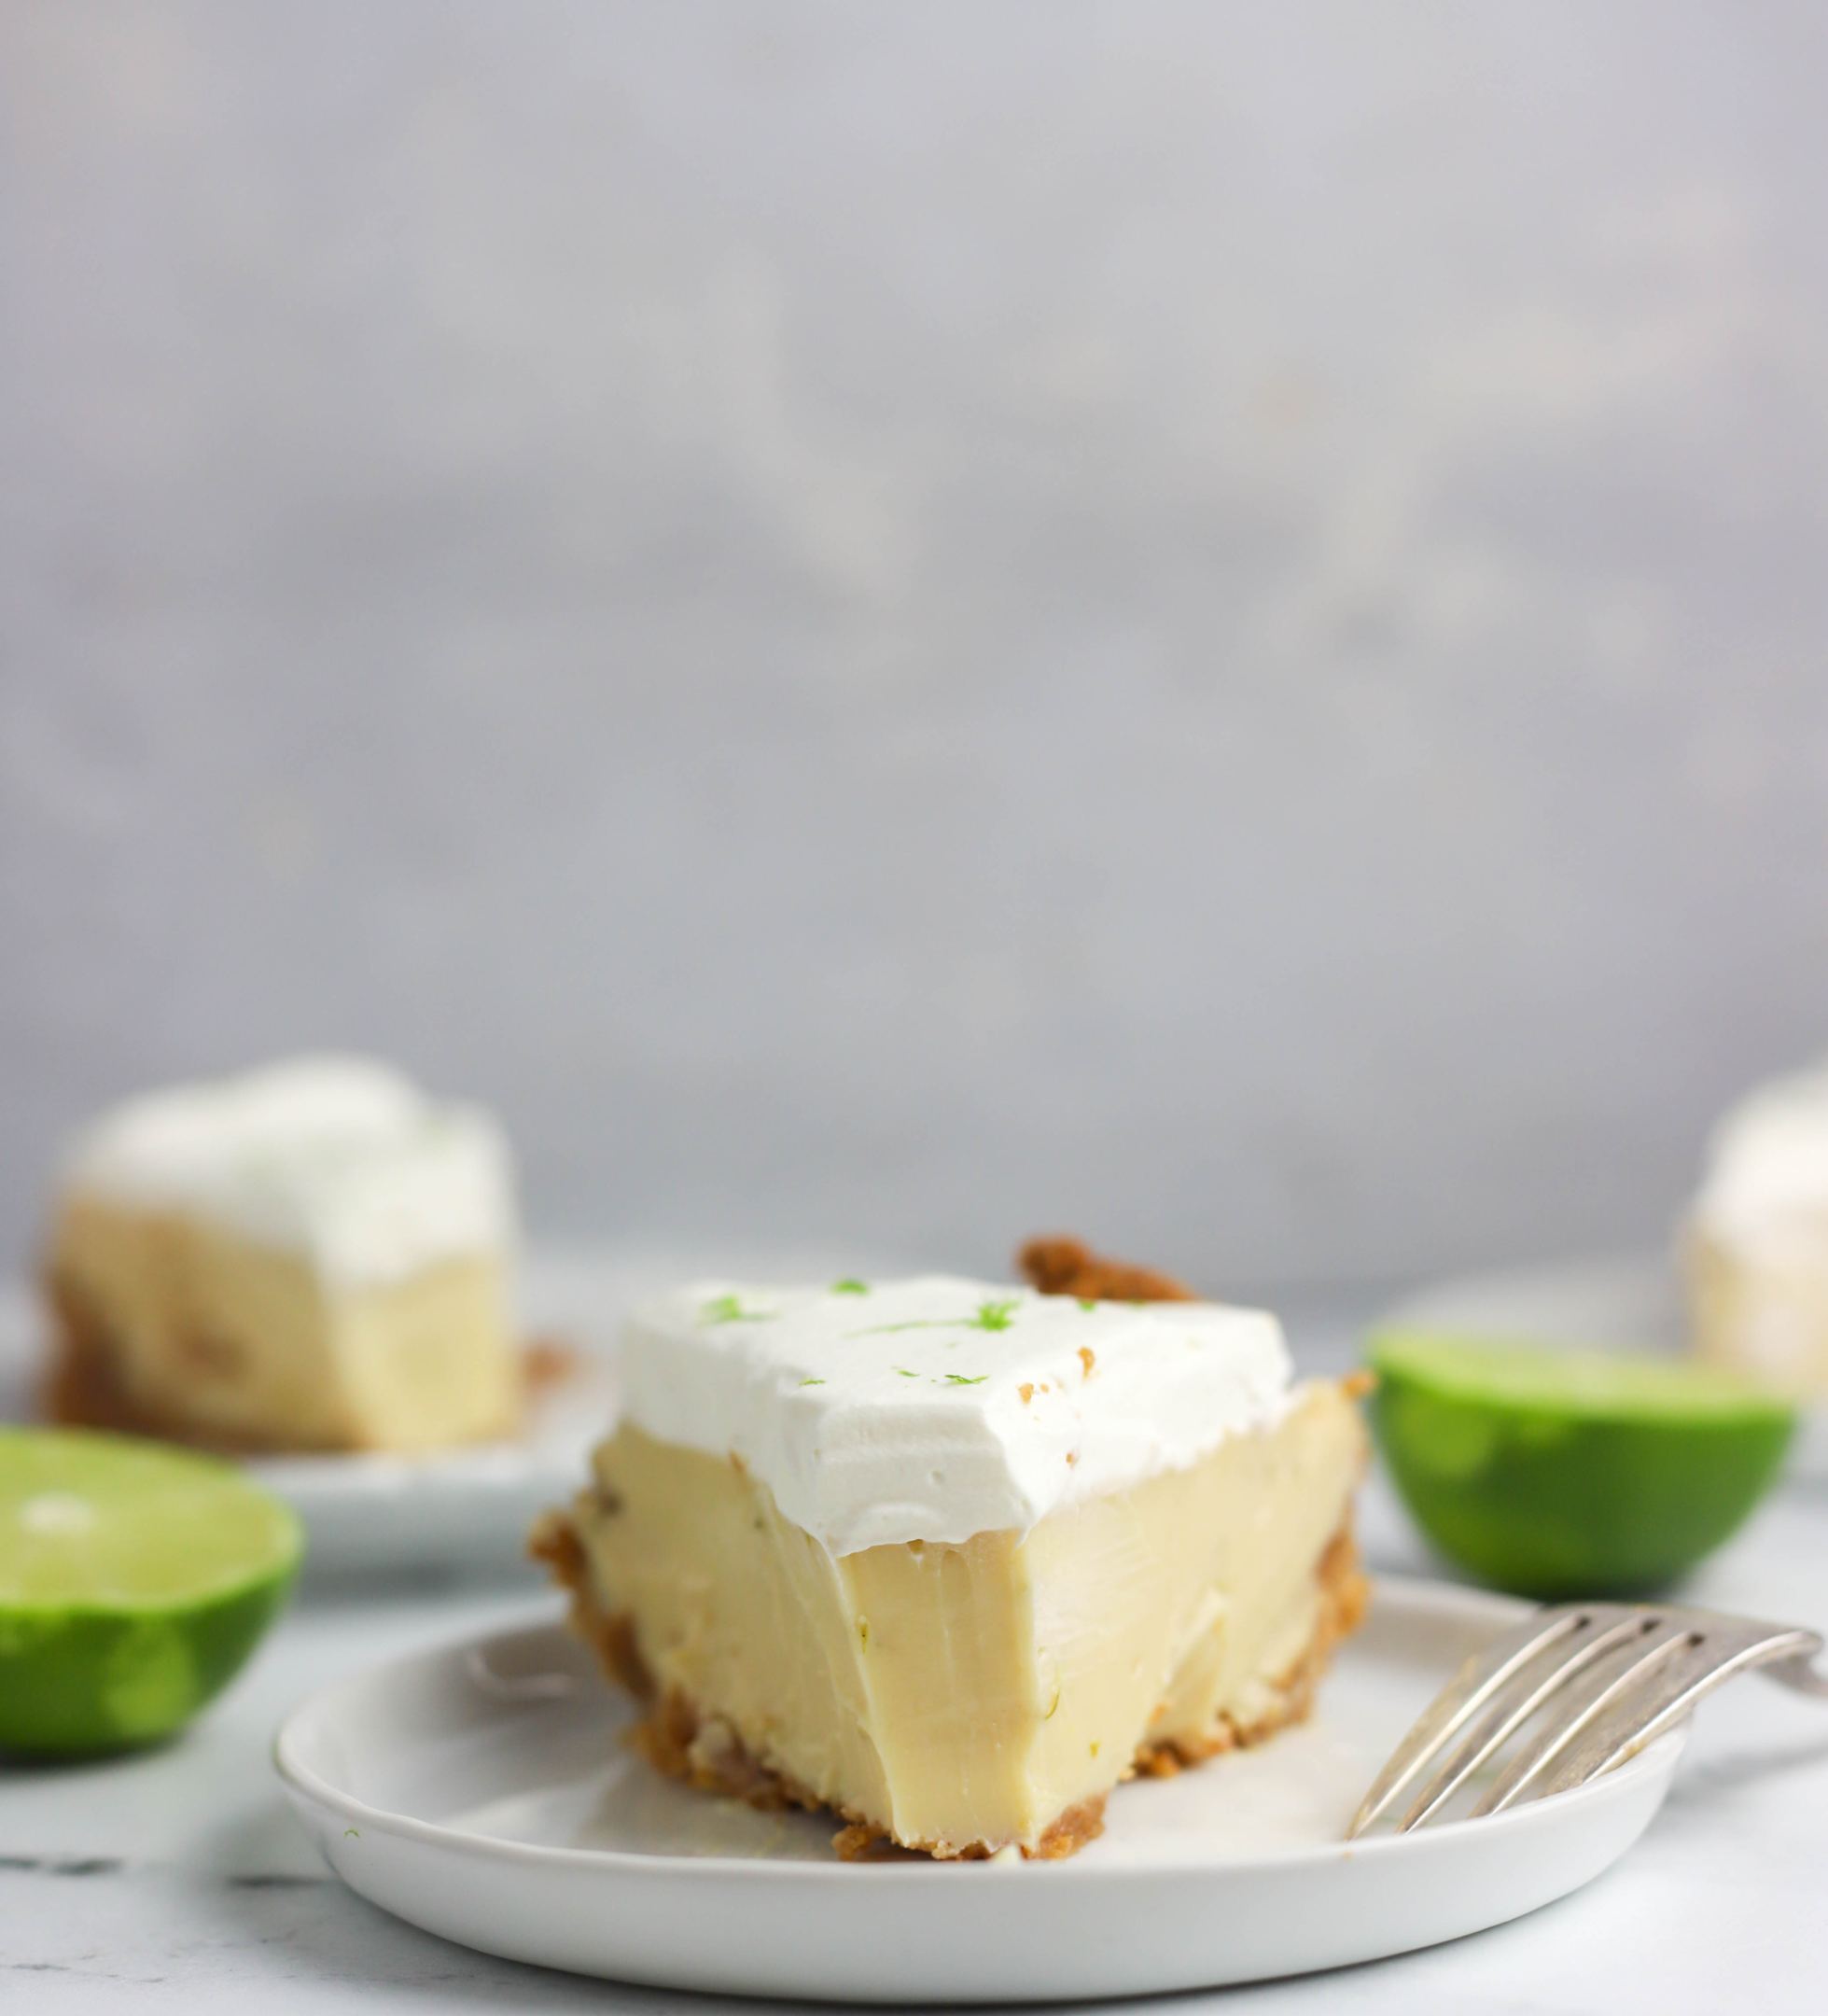 slice of key lime pie on a plate with a fork